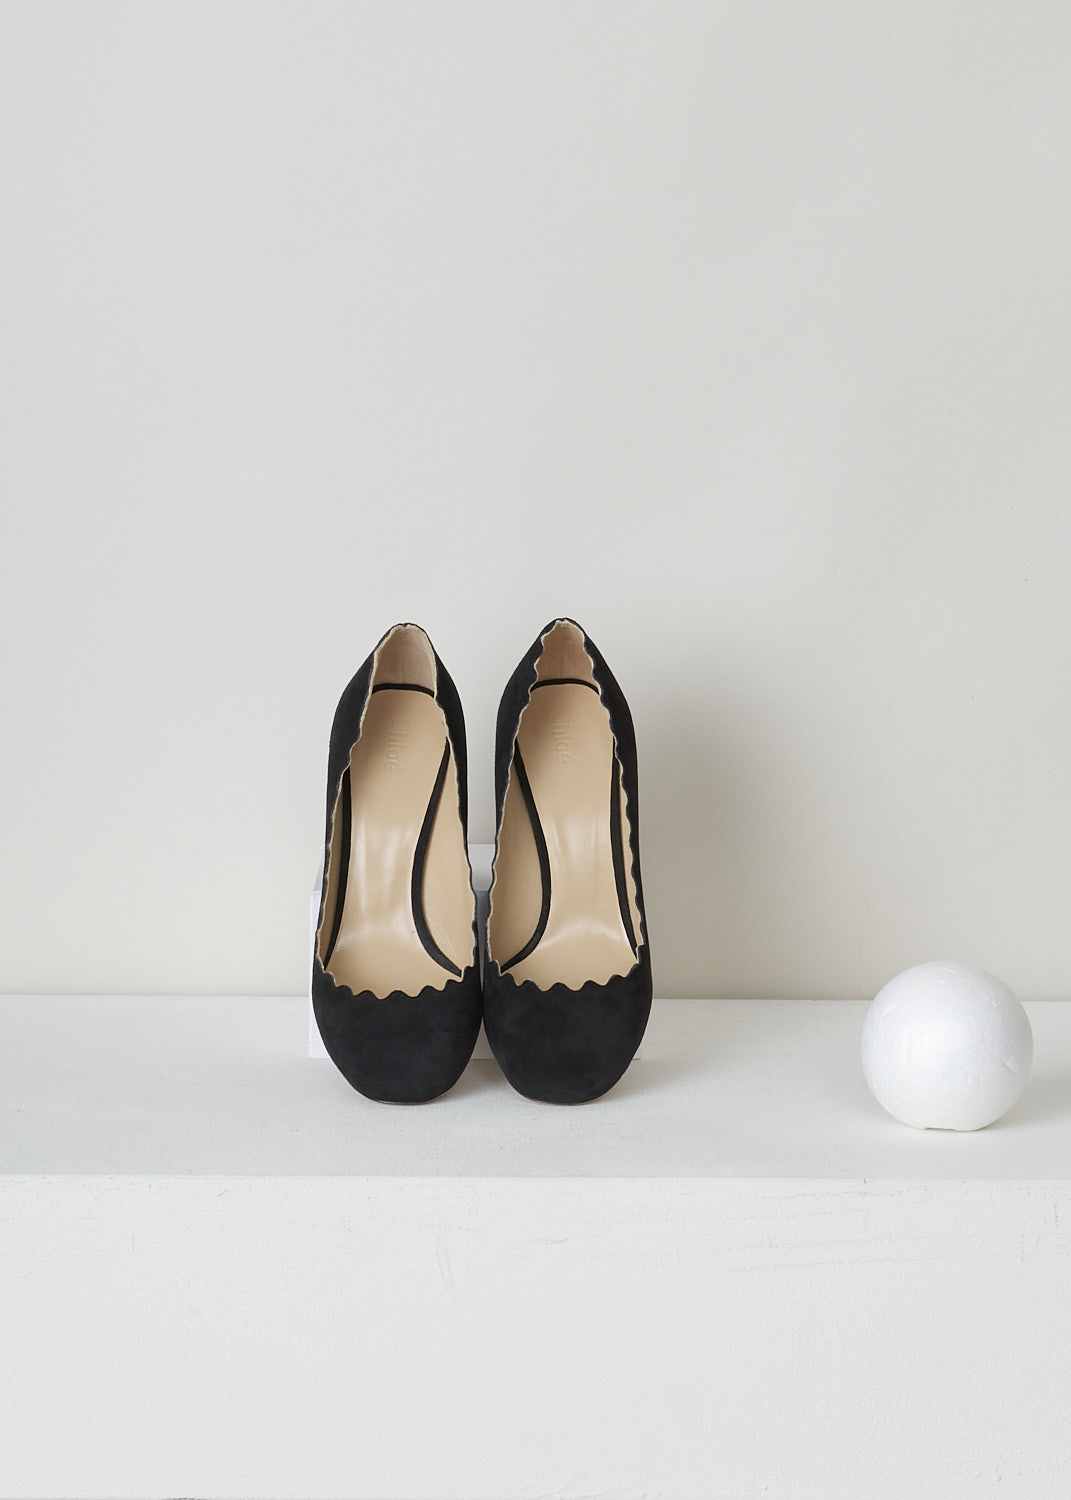 CHLOÃ‰, BLACK PUMPS WITH SCALLOPED TOPLINE, CH26231_E01_IA999_BLACK, Black, Top, Black suede pumps featuring a chunky heel, round toe vamp and a scalloped topline. 
